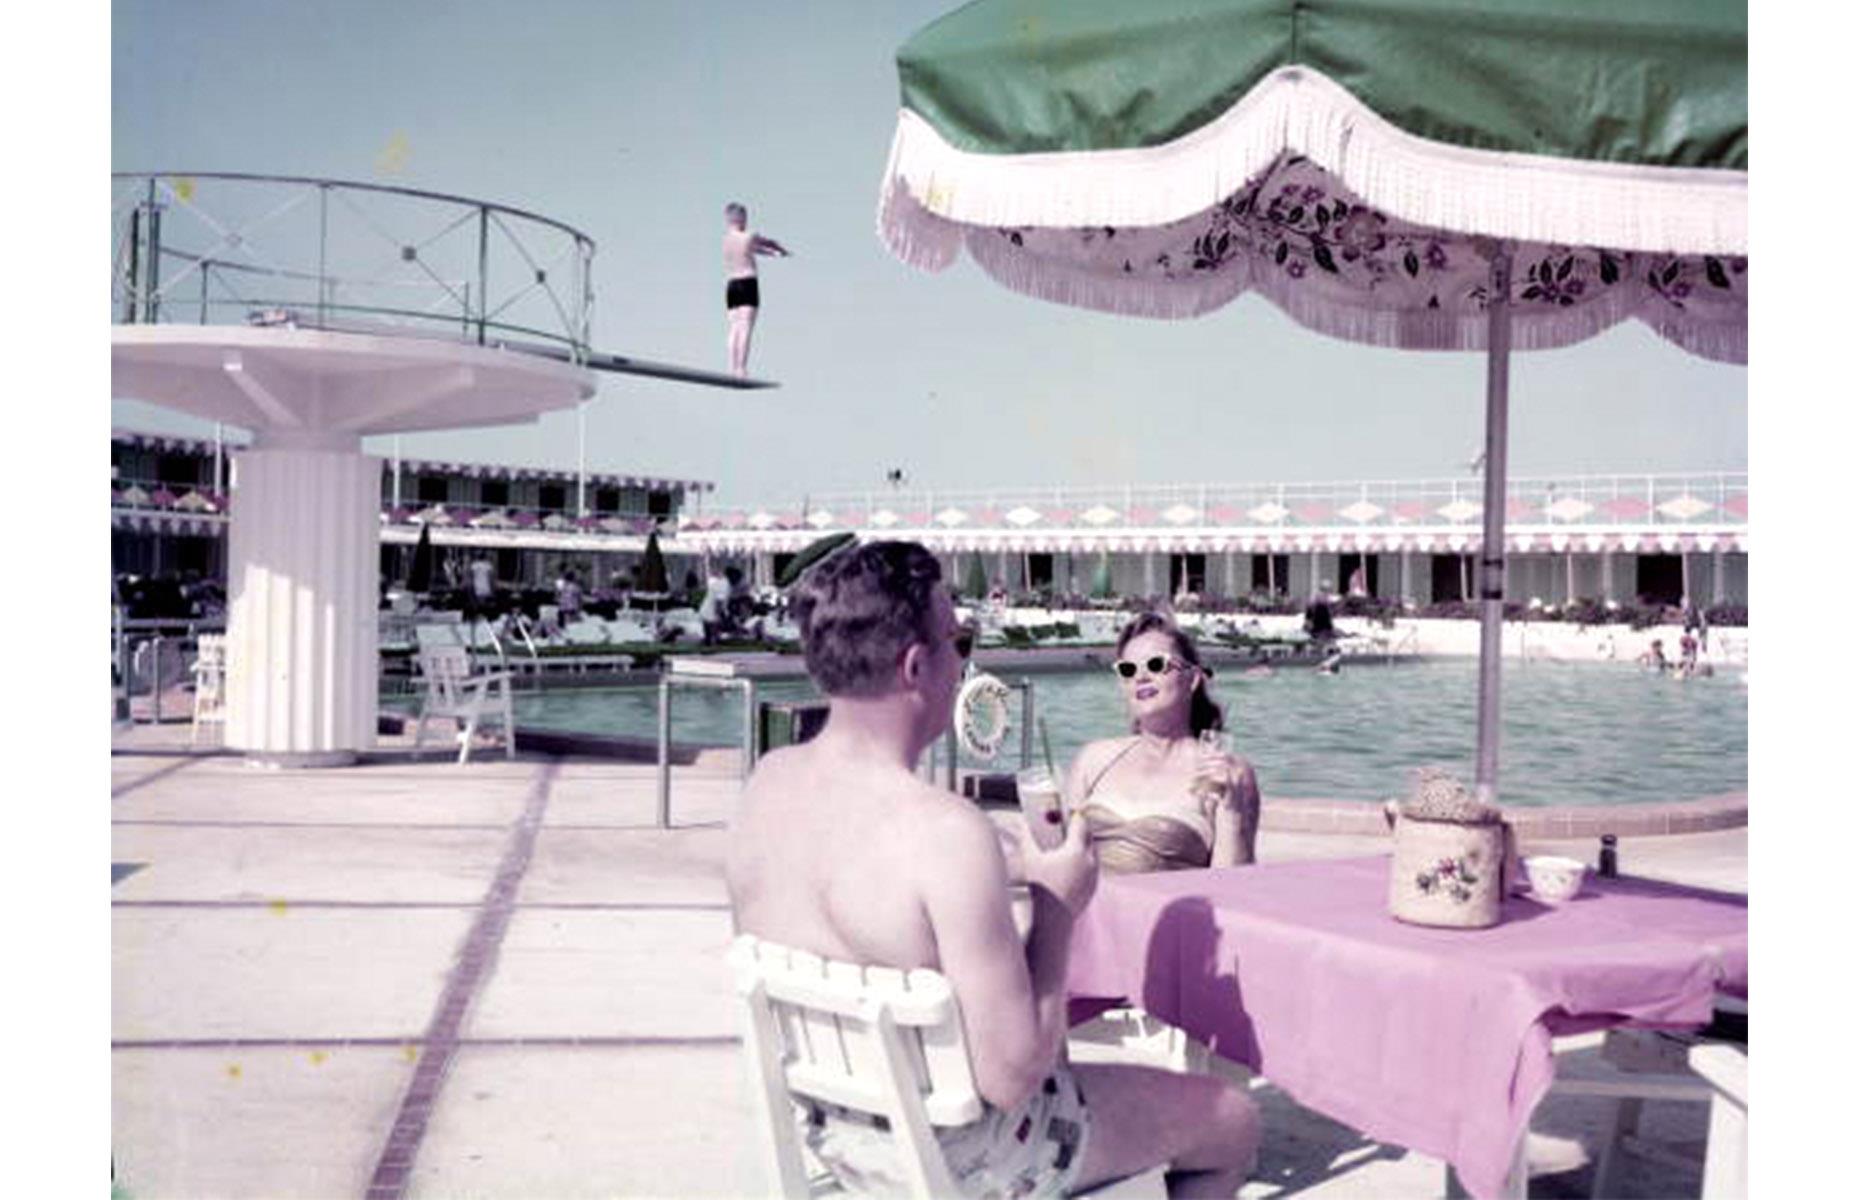 In the 1950s, Miami was as sought-after as ever, counting the rich and famous among the summer vacationers that descended on its shores. Here a glamorous young couple drink cocktails by the pool at the Eden Roc Cabana Club in Miami Beach in 1955.